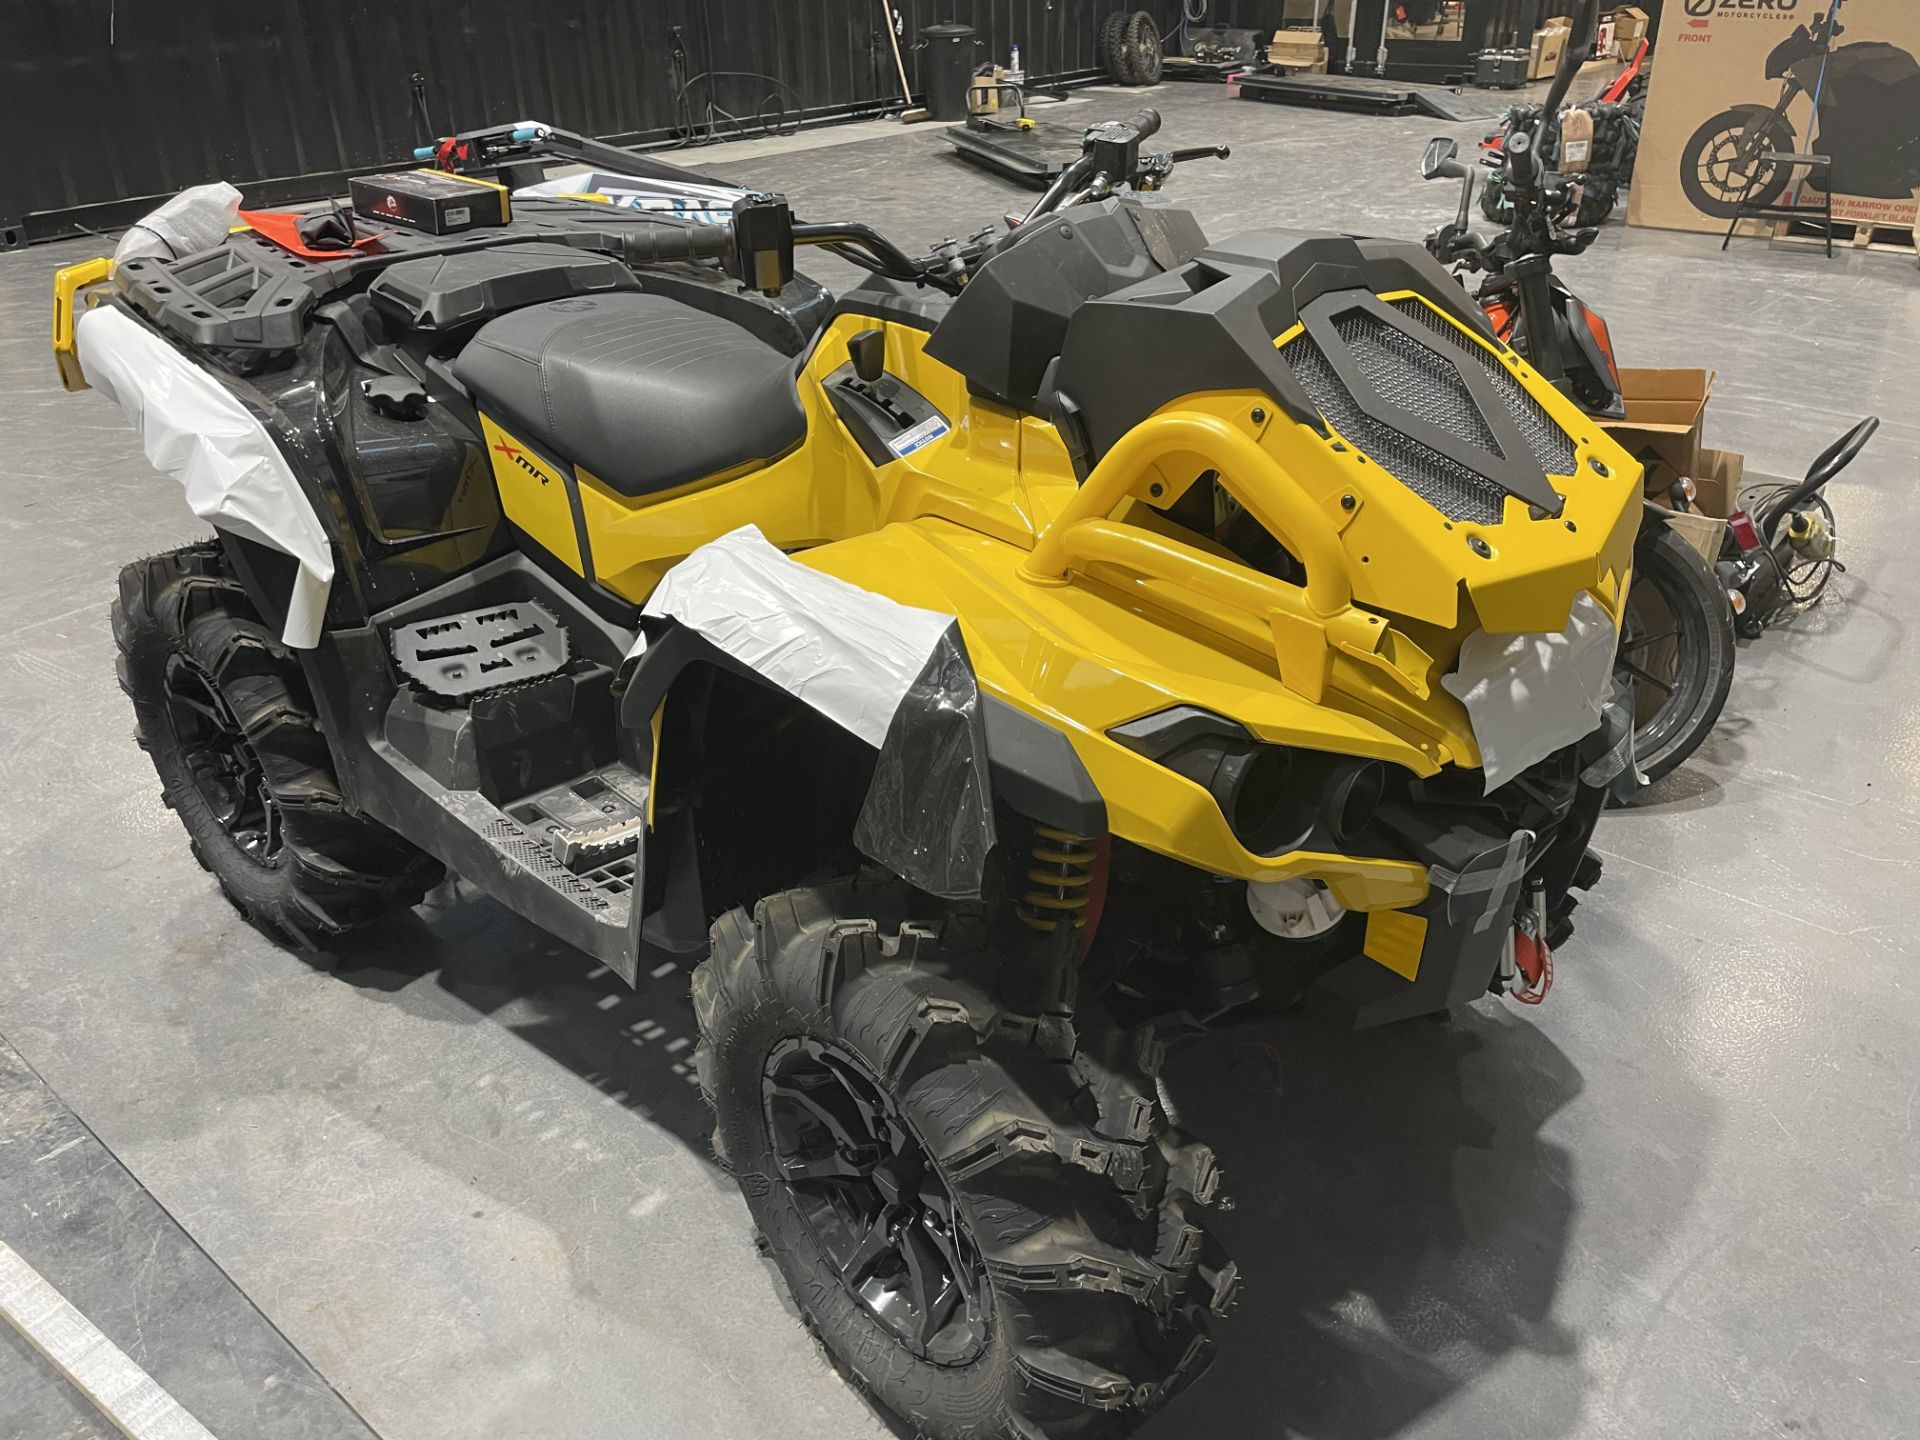 A BRP Can-Am XMR 1000R V-TWIN EFI Quad Bike VIN No.3JBLWAX75MJ001088 with key (as new).